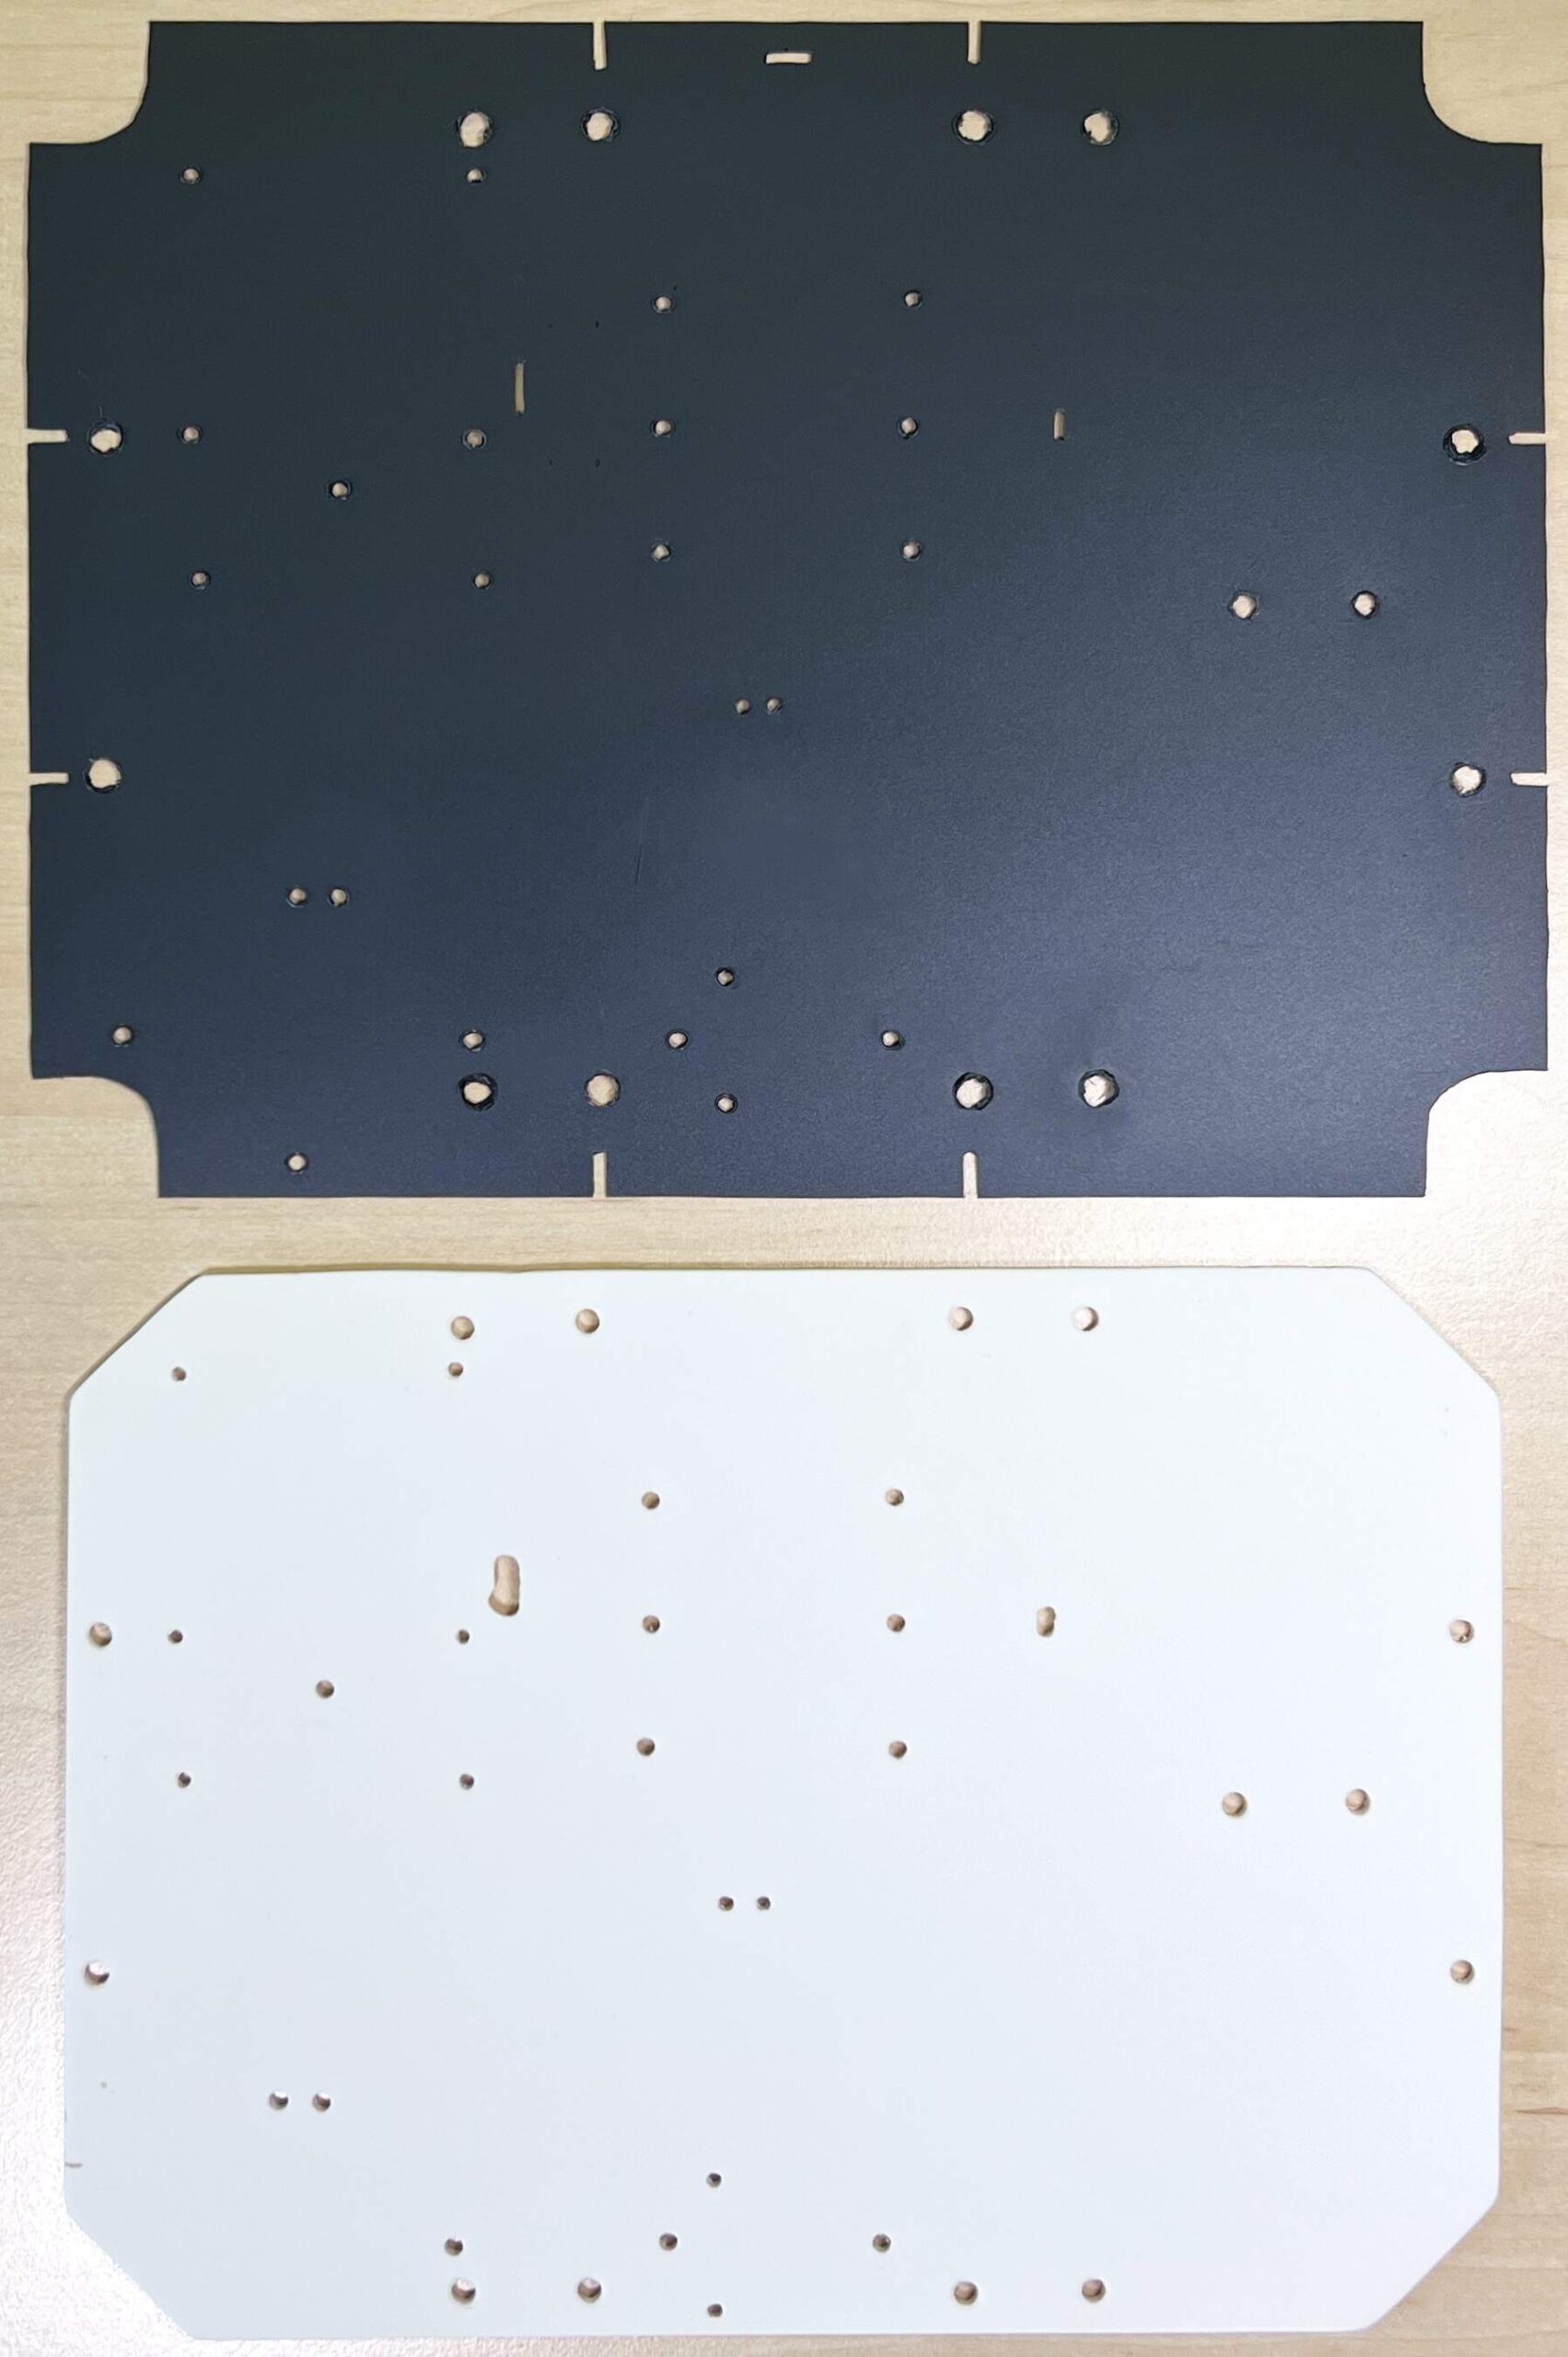 Mounting holes in the modeling pad and plastic flat sheet plate 3 mm thick